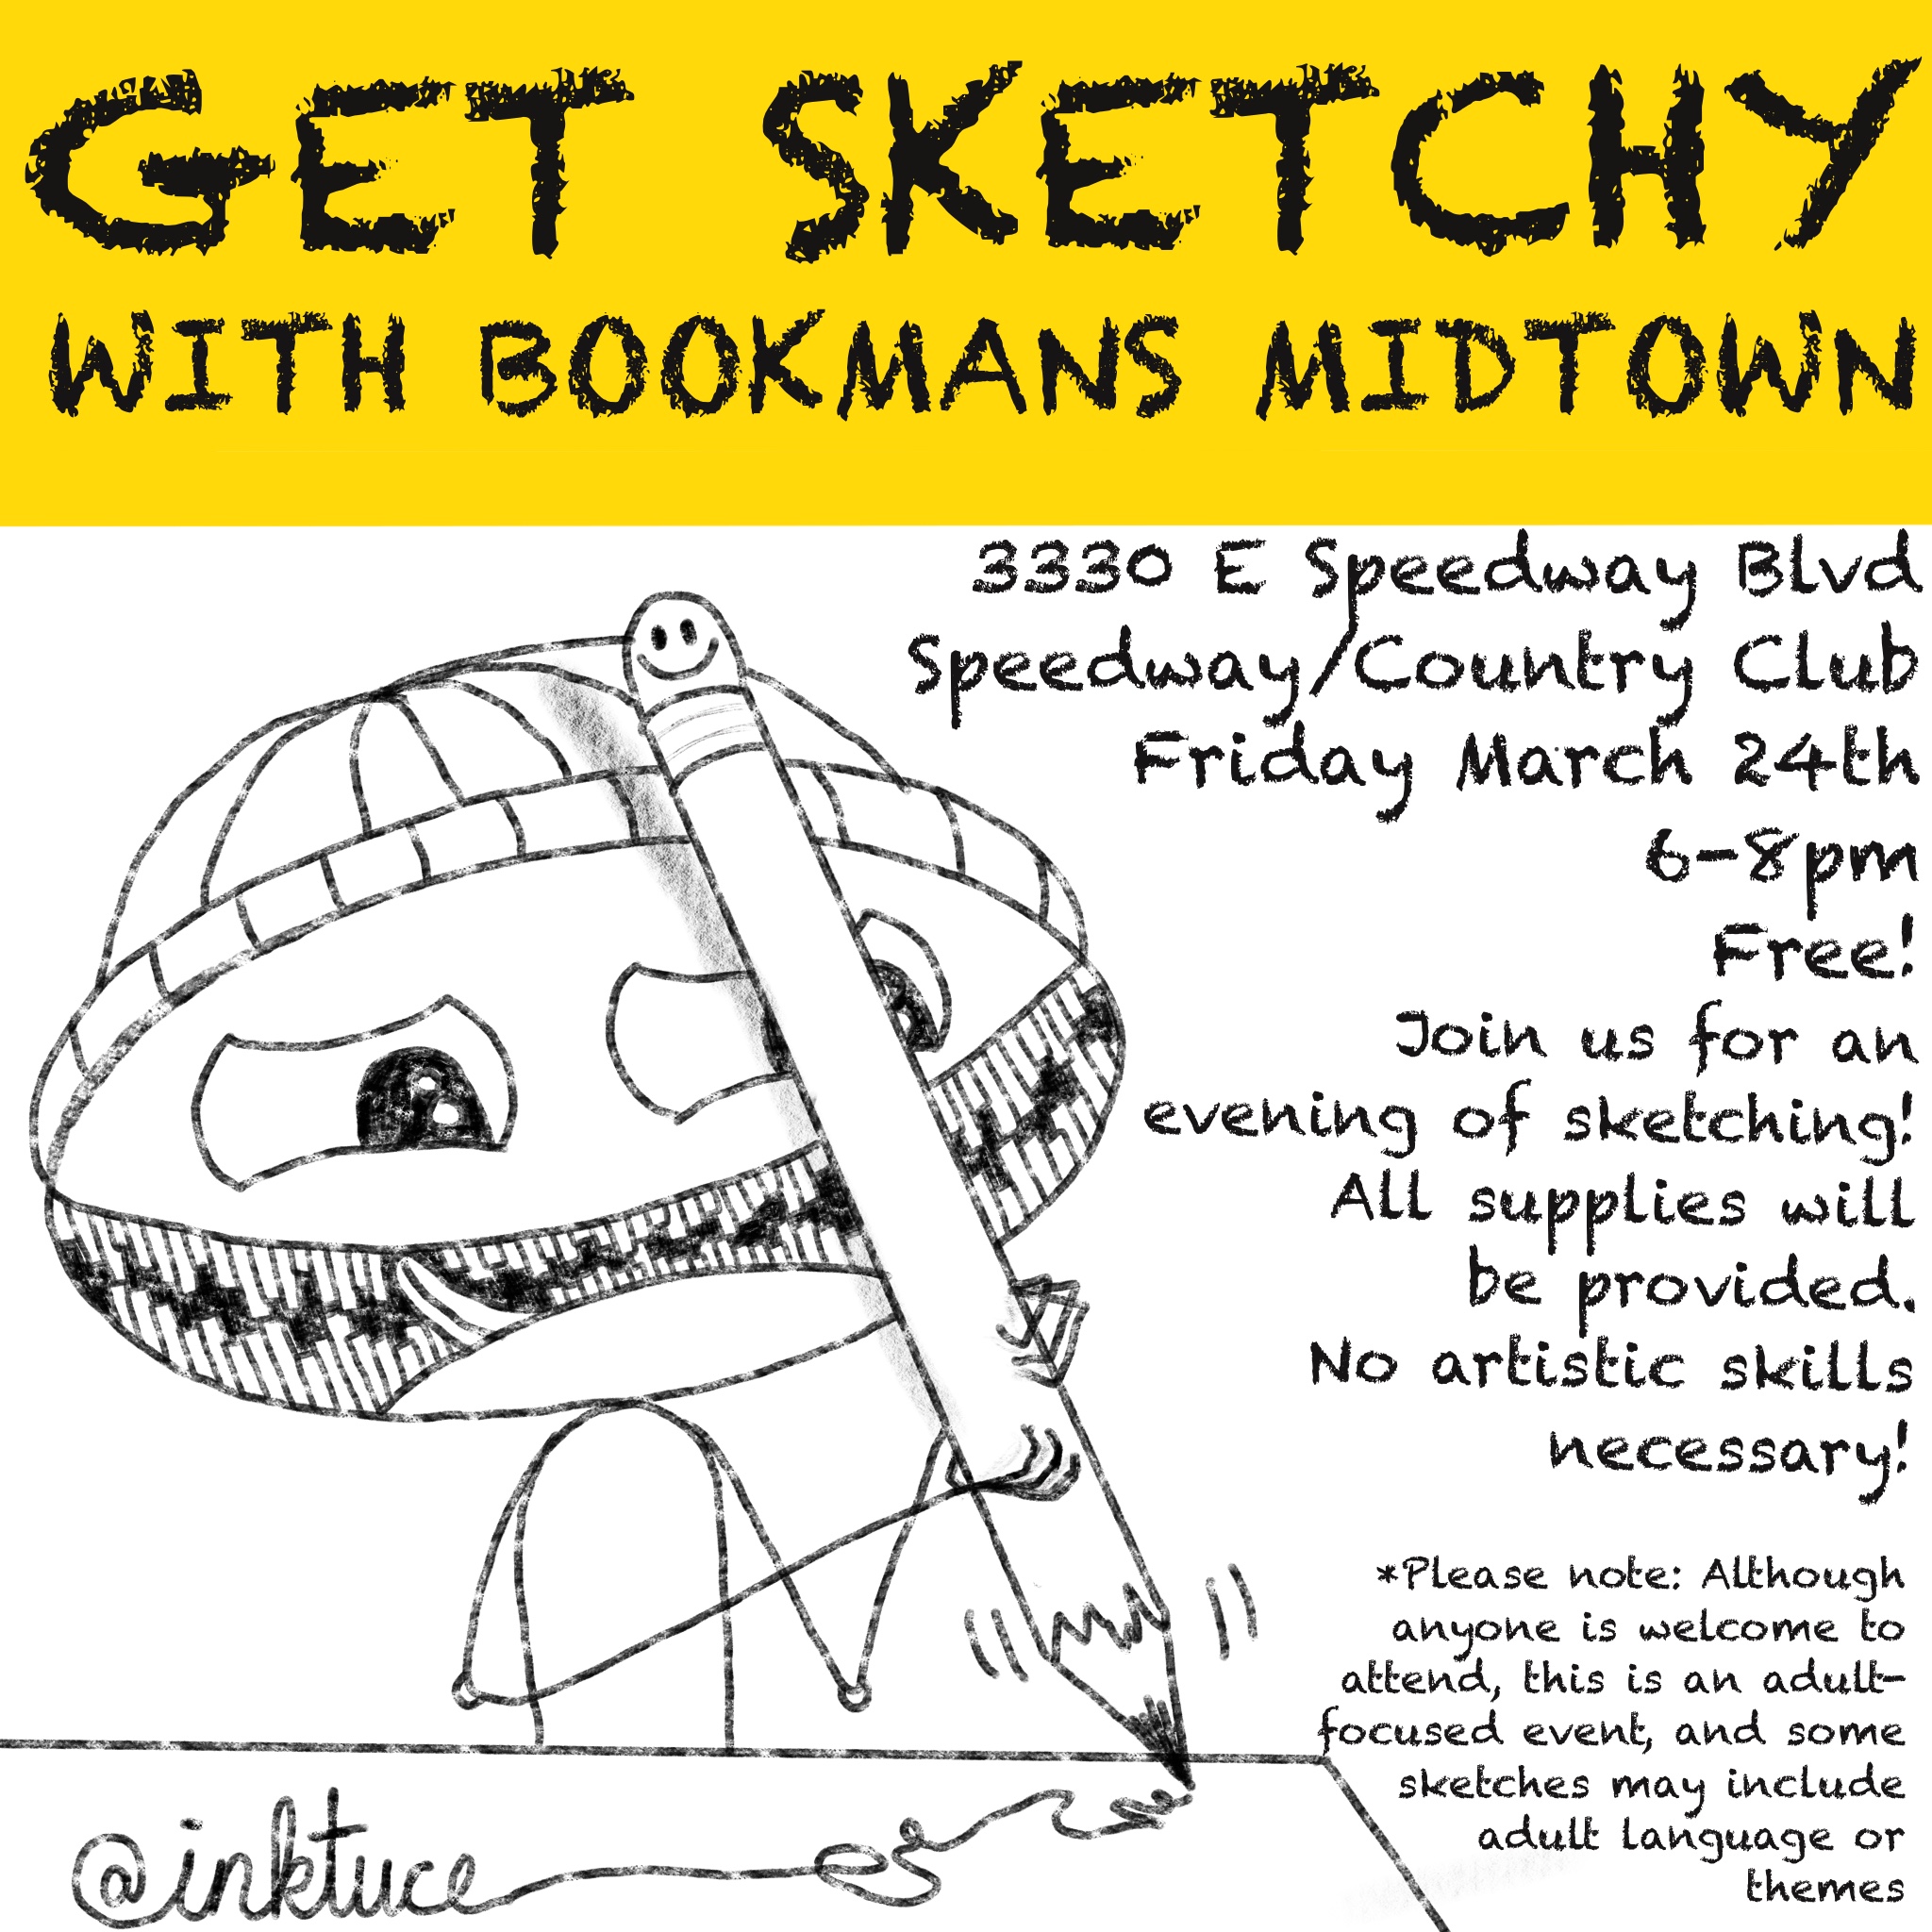 march event flier for sketchy meet up